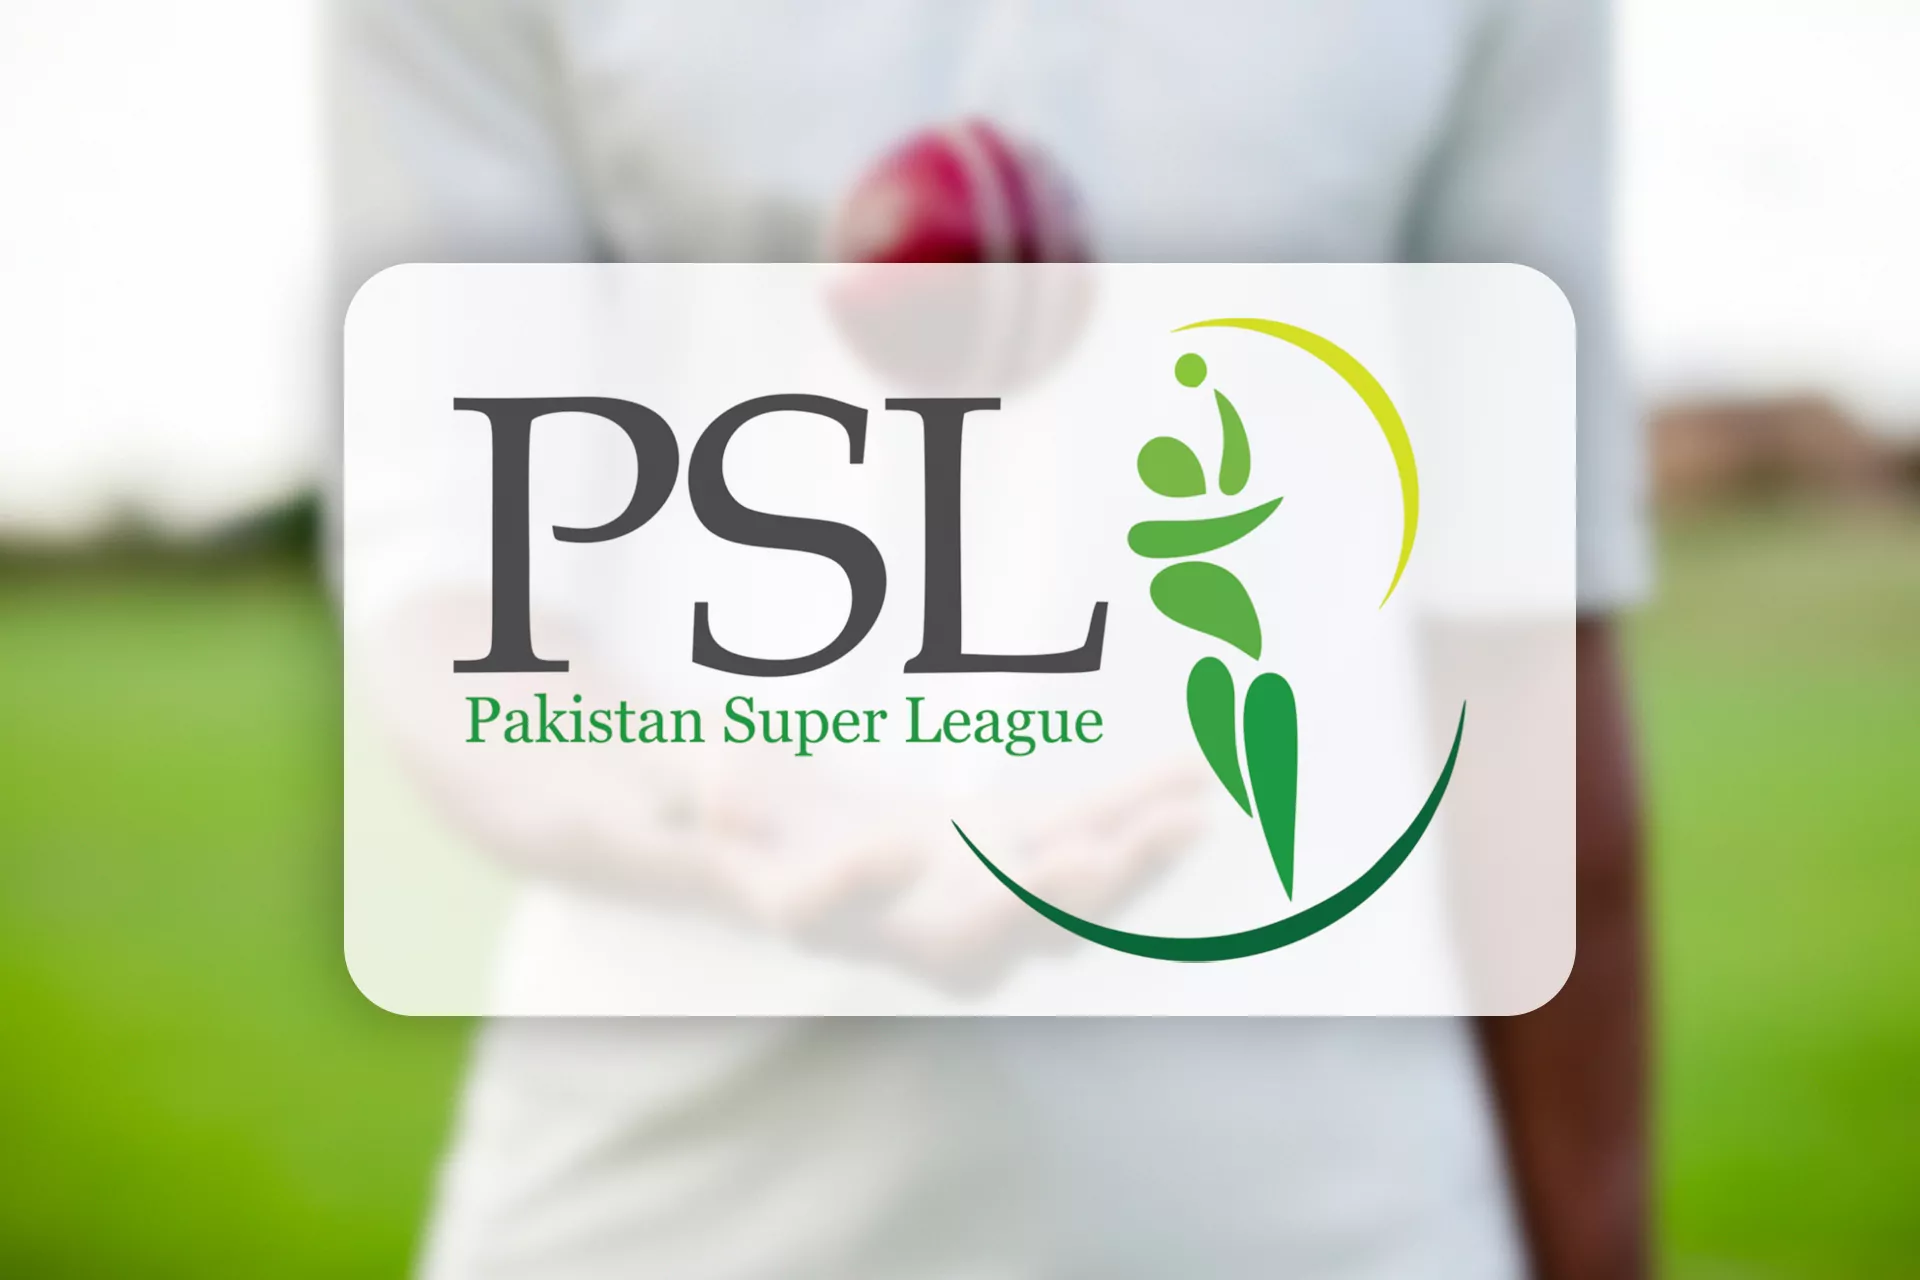 PSL is a local cricket championship of Pakistan.